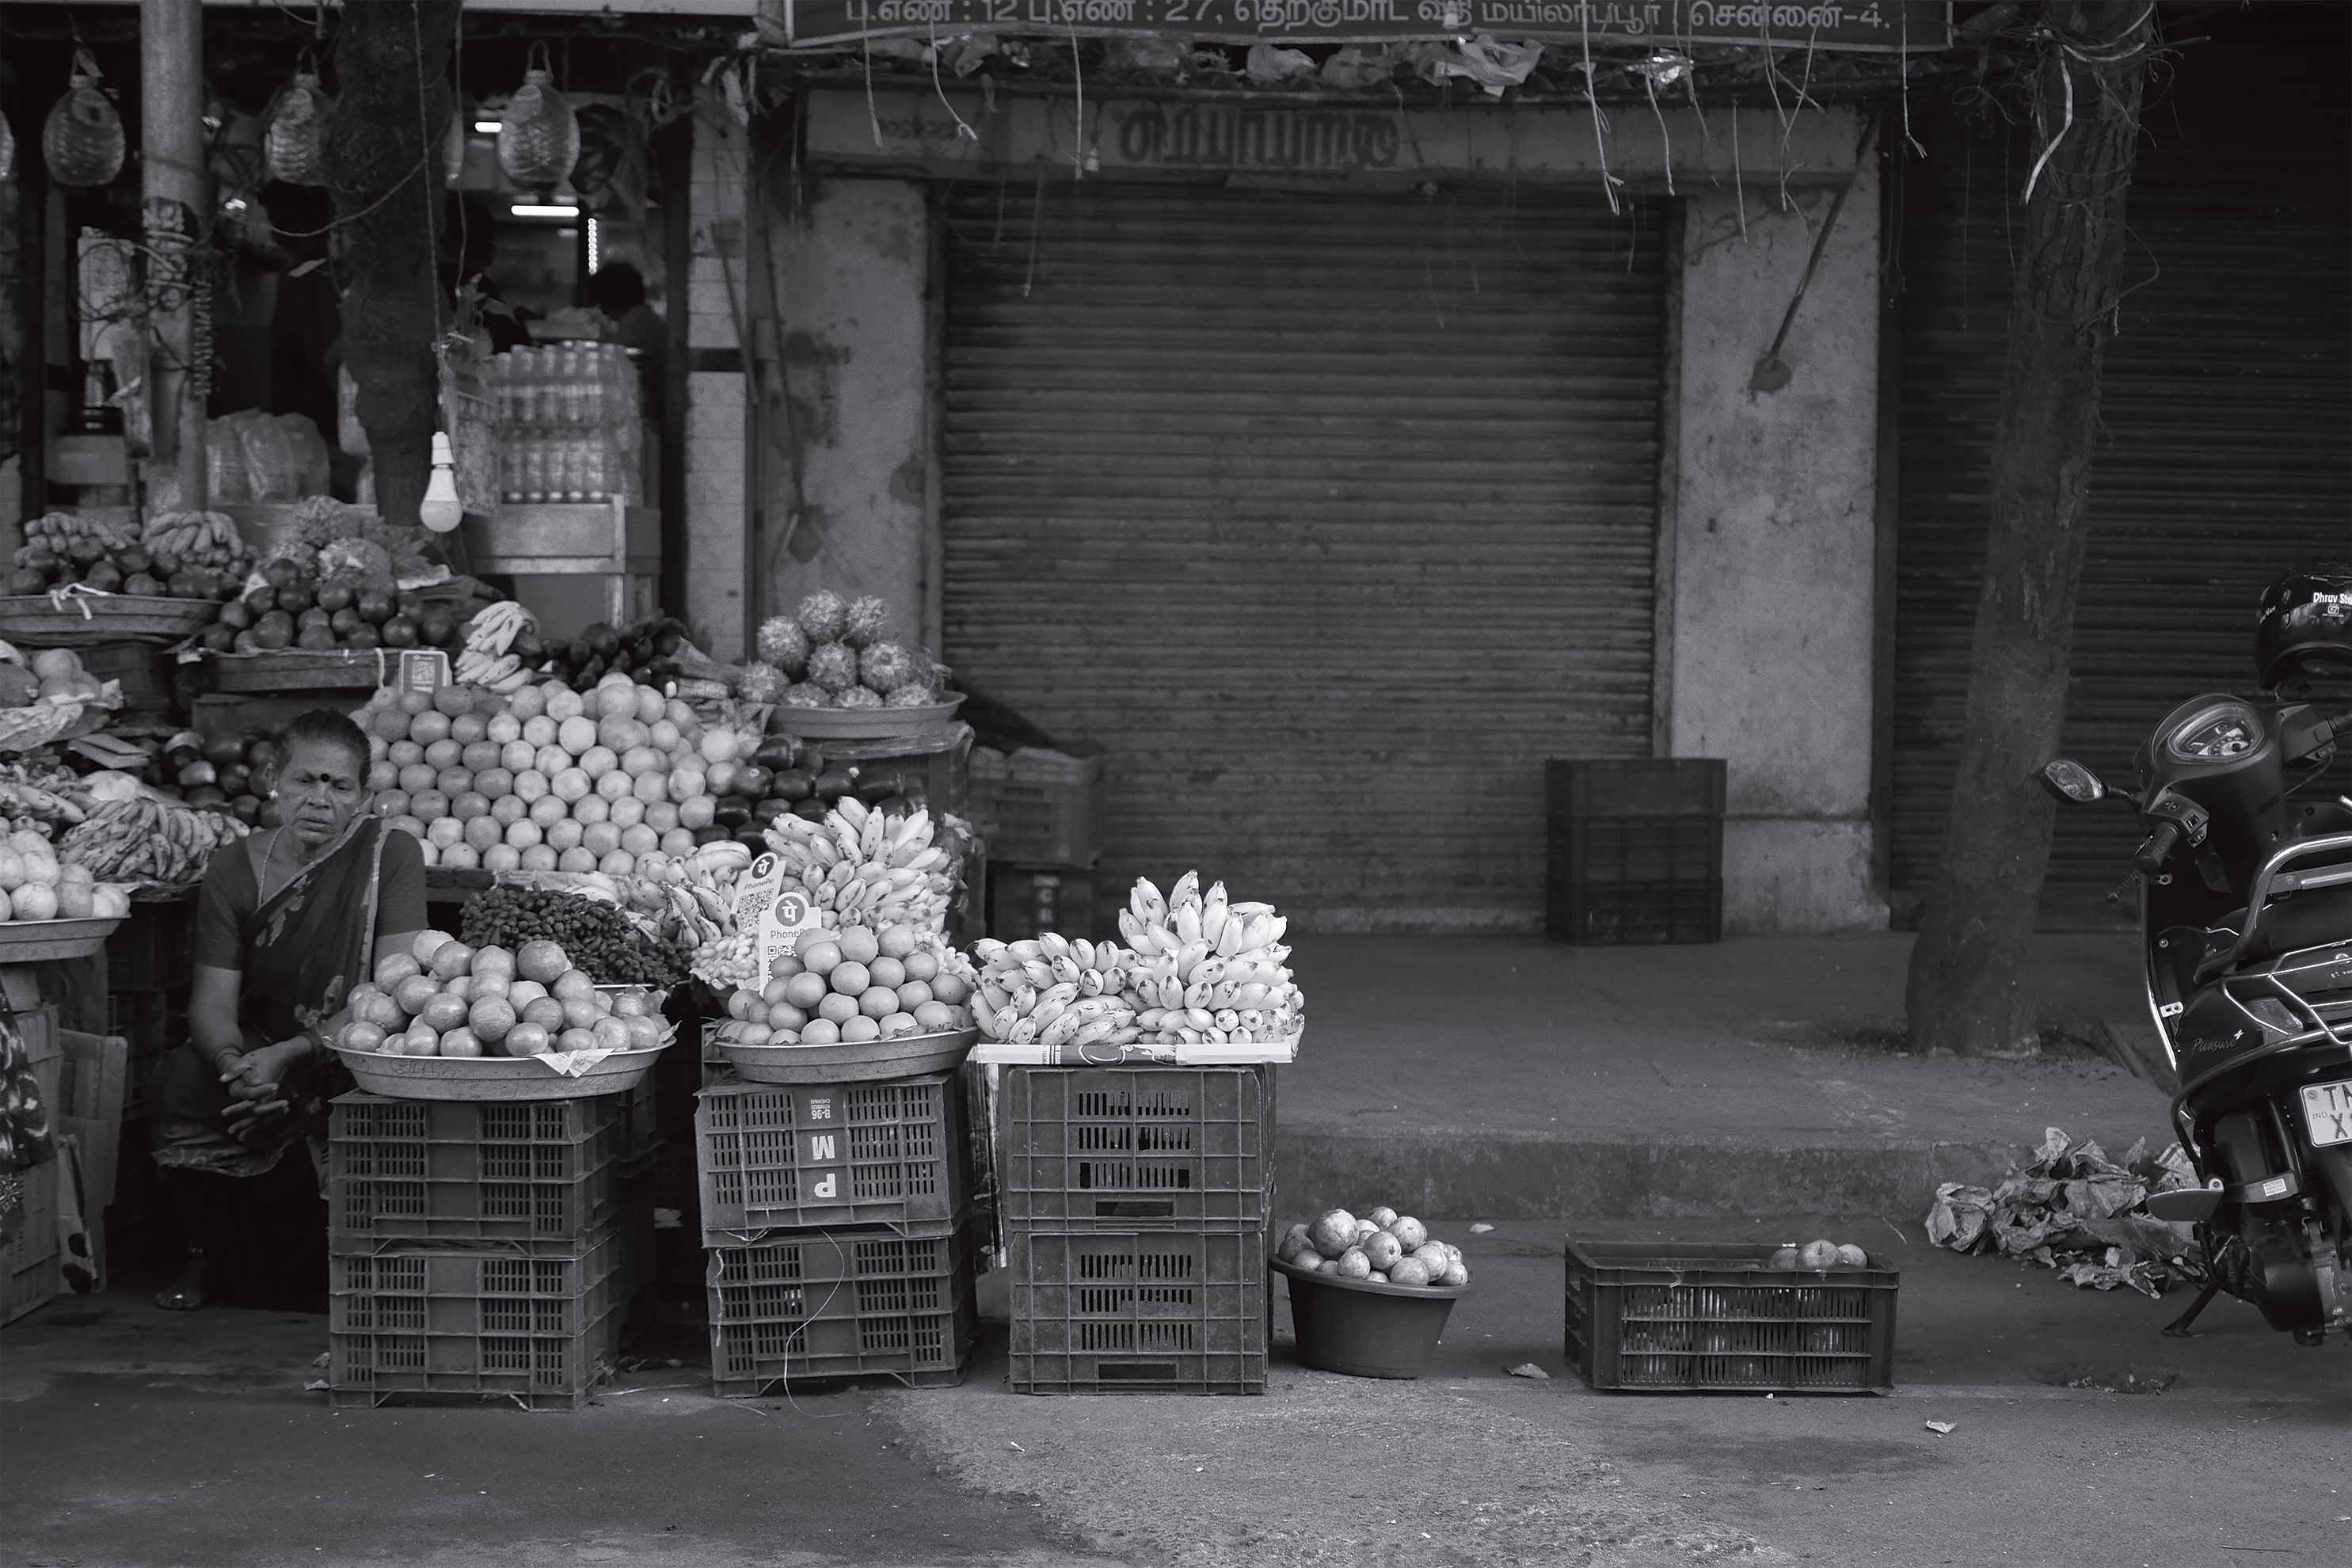 A fruit vendor lost in her thoughts